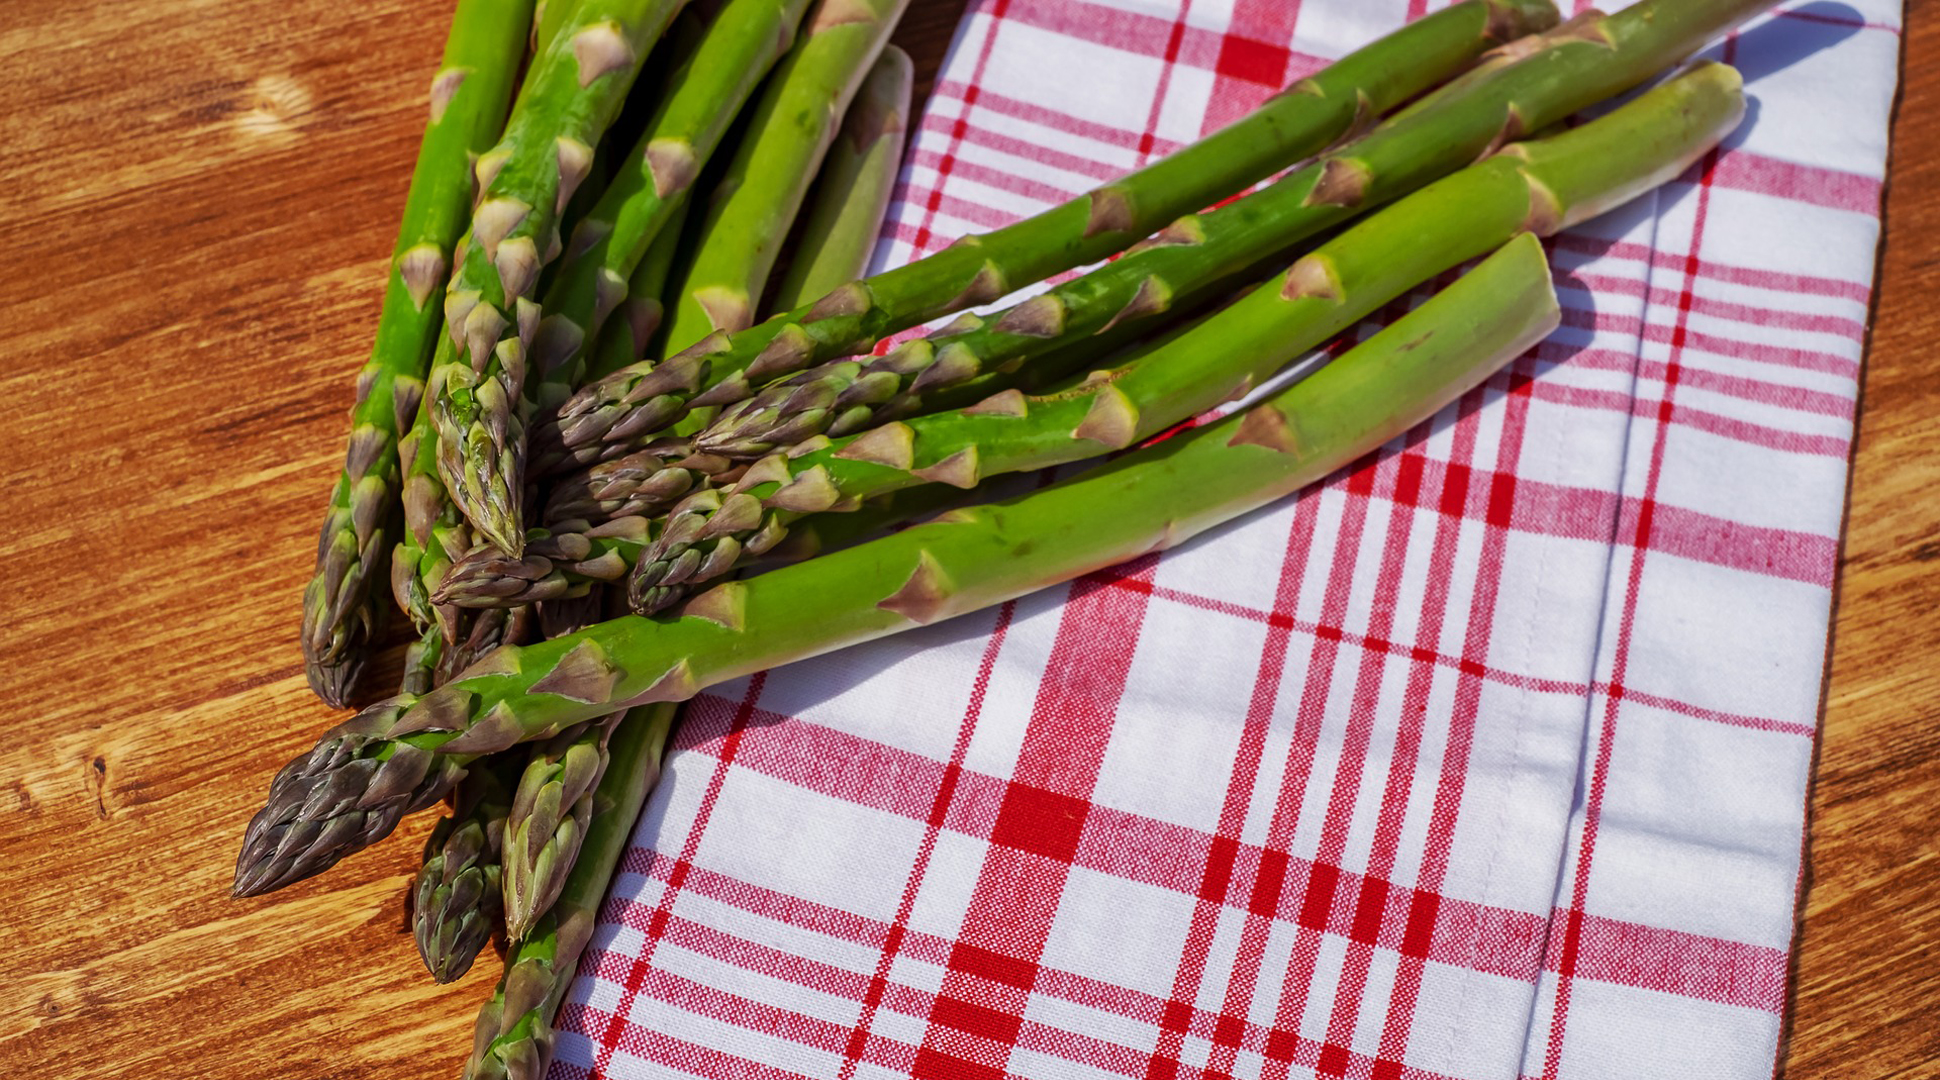 Just eat the asparagus